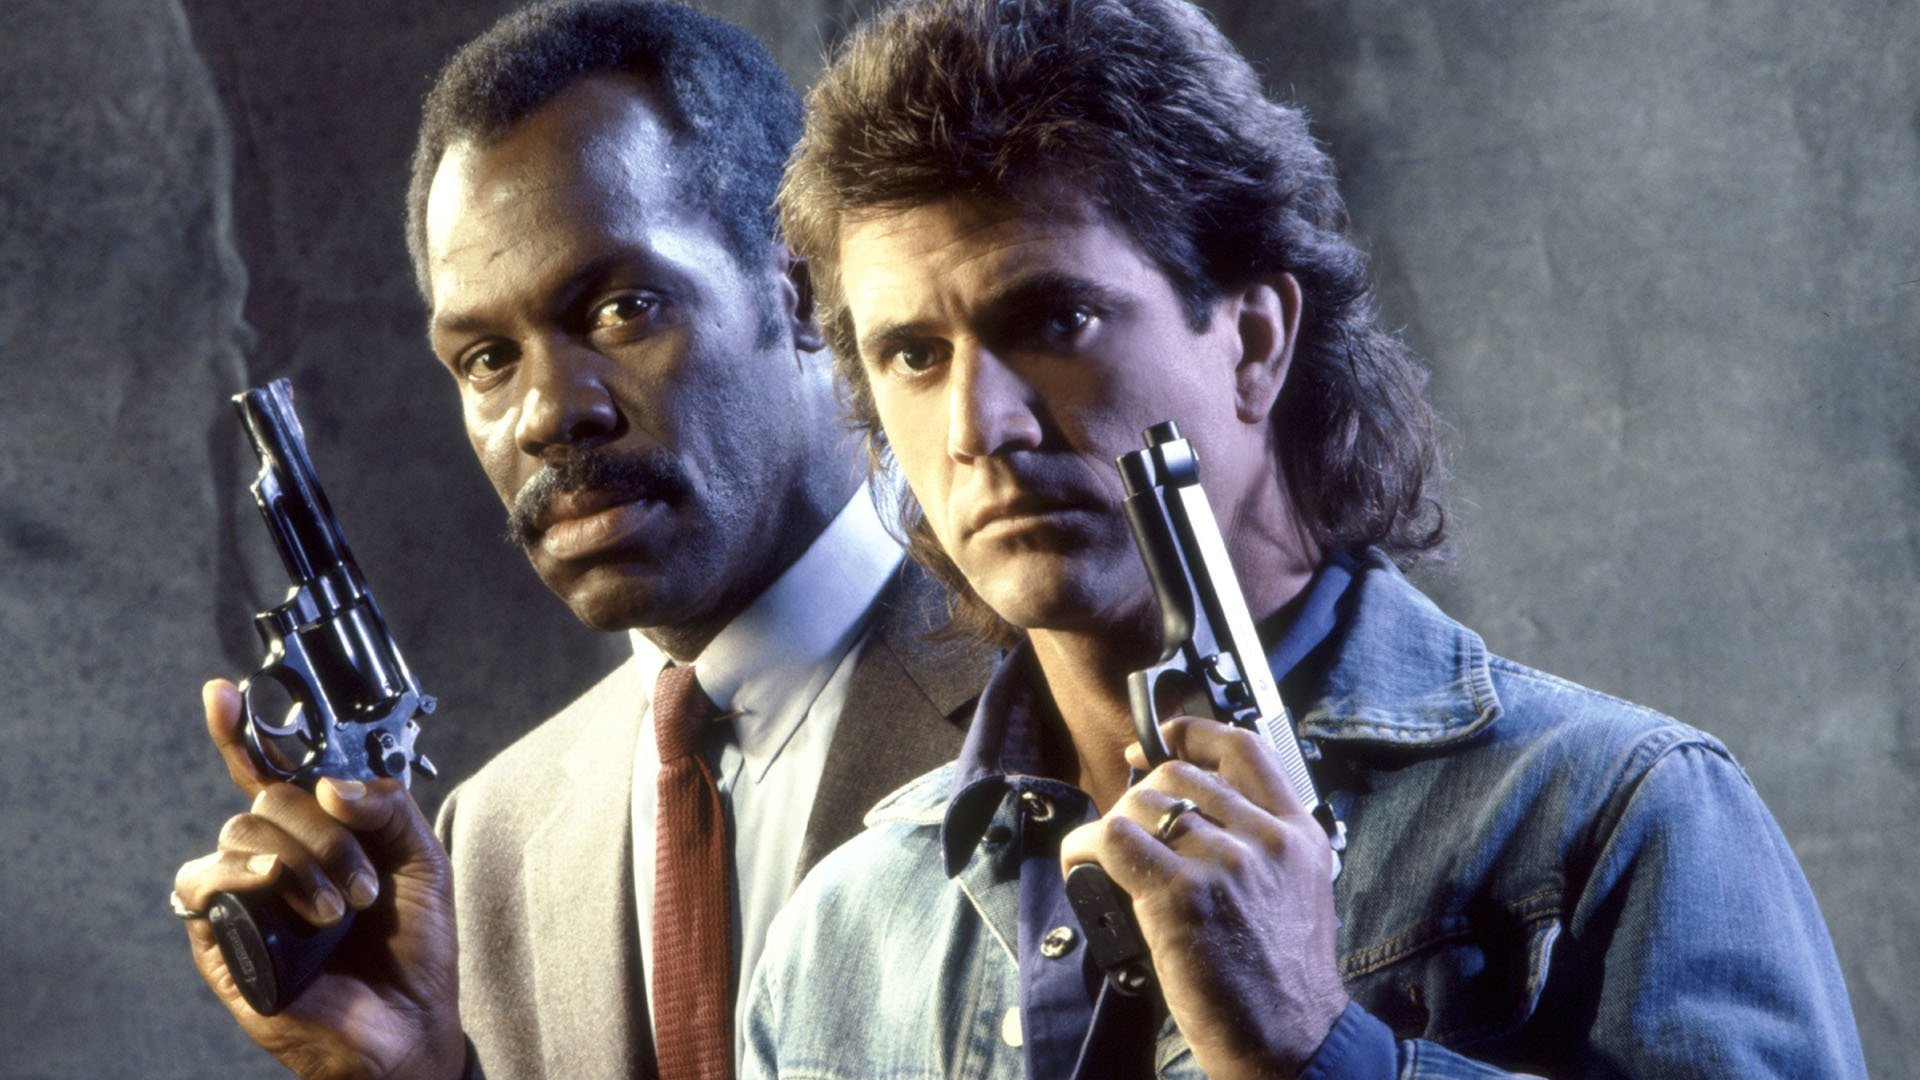 lethal weapon wallpaper,music,musical instrument,music artist,movie,musician